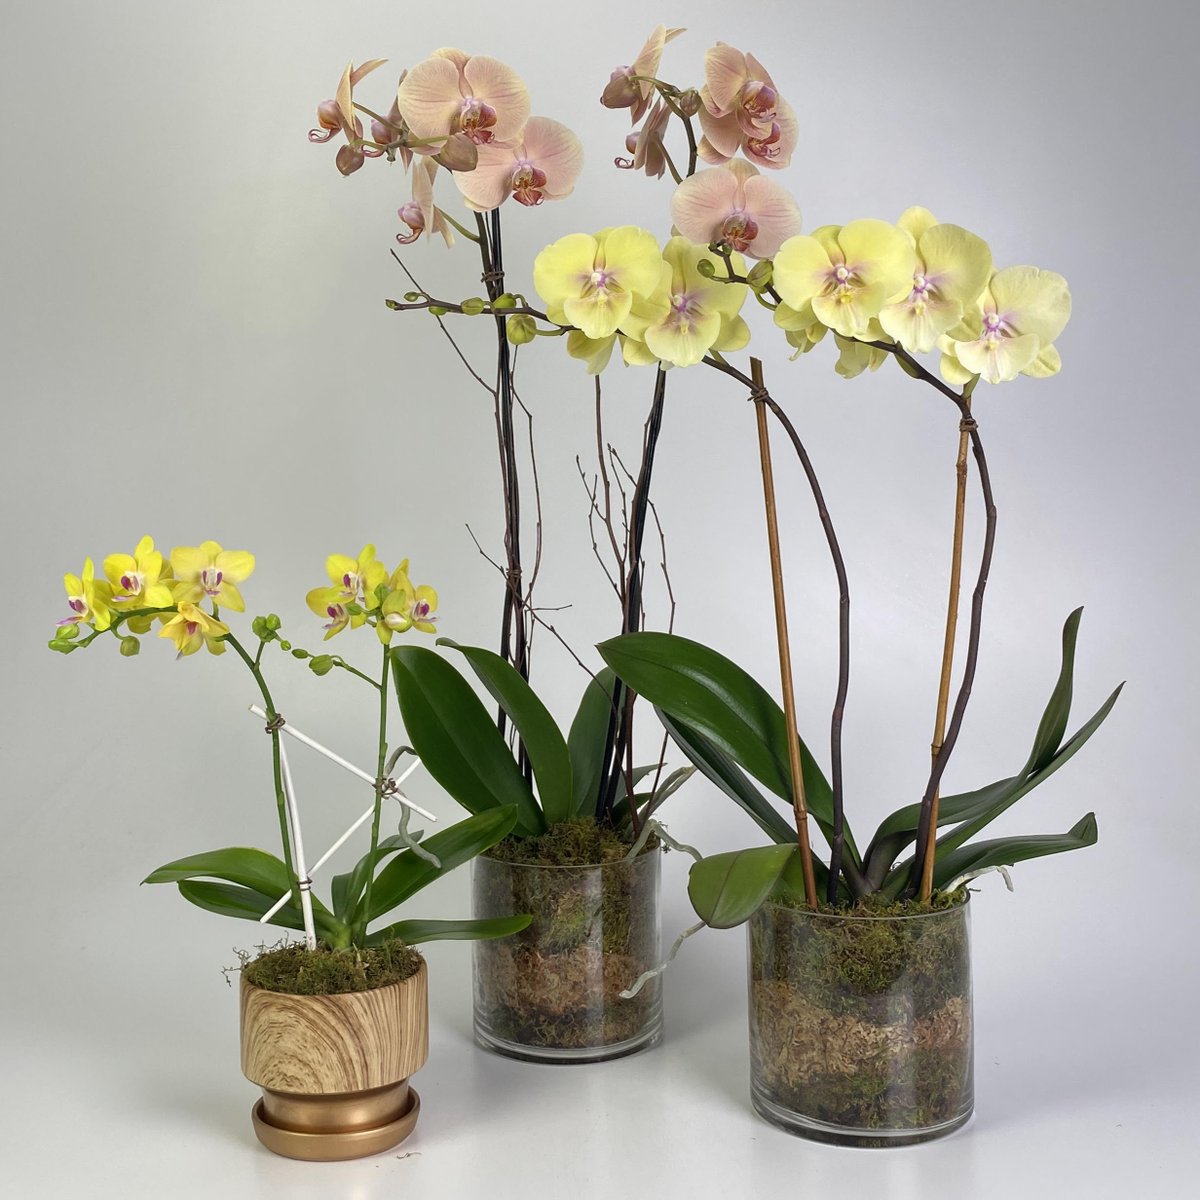 It's National Orchid Day! The orchid symbolizes love, luxury, beauty, and strength, making it the most sought-after ornamental plant. Stop in today to pick up some orchids for yourself or as a gift! #orchids #nationalorchidday #florist #orchidlover